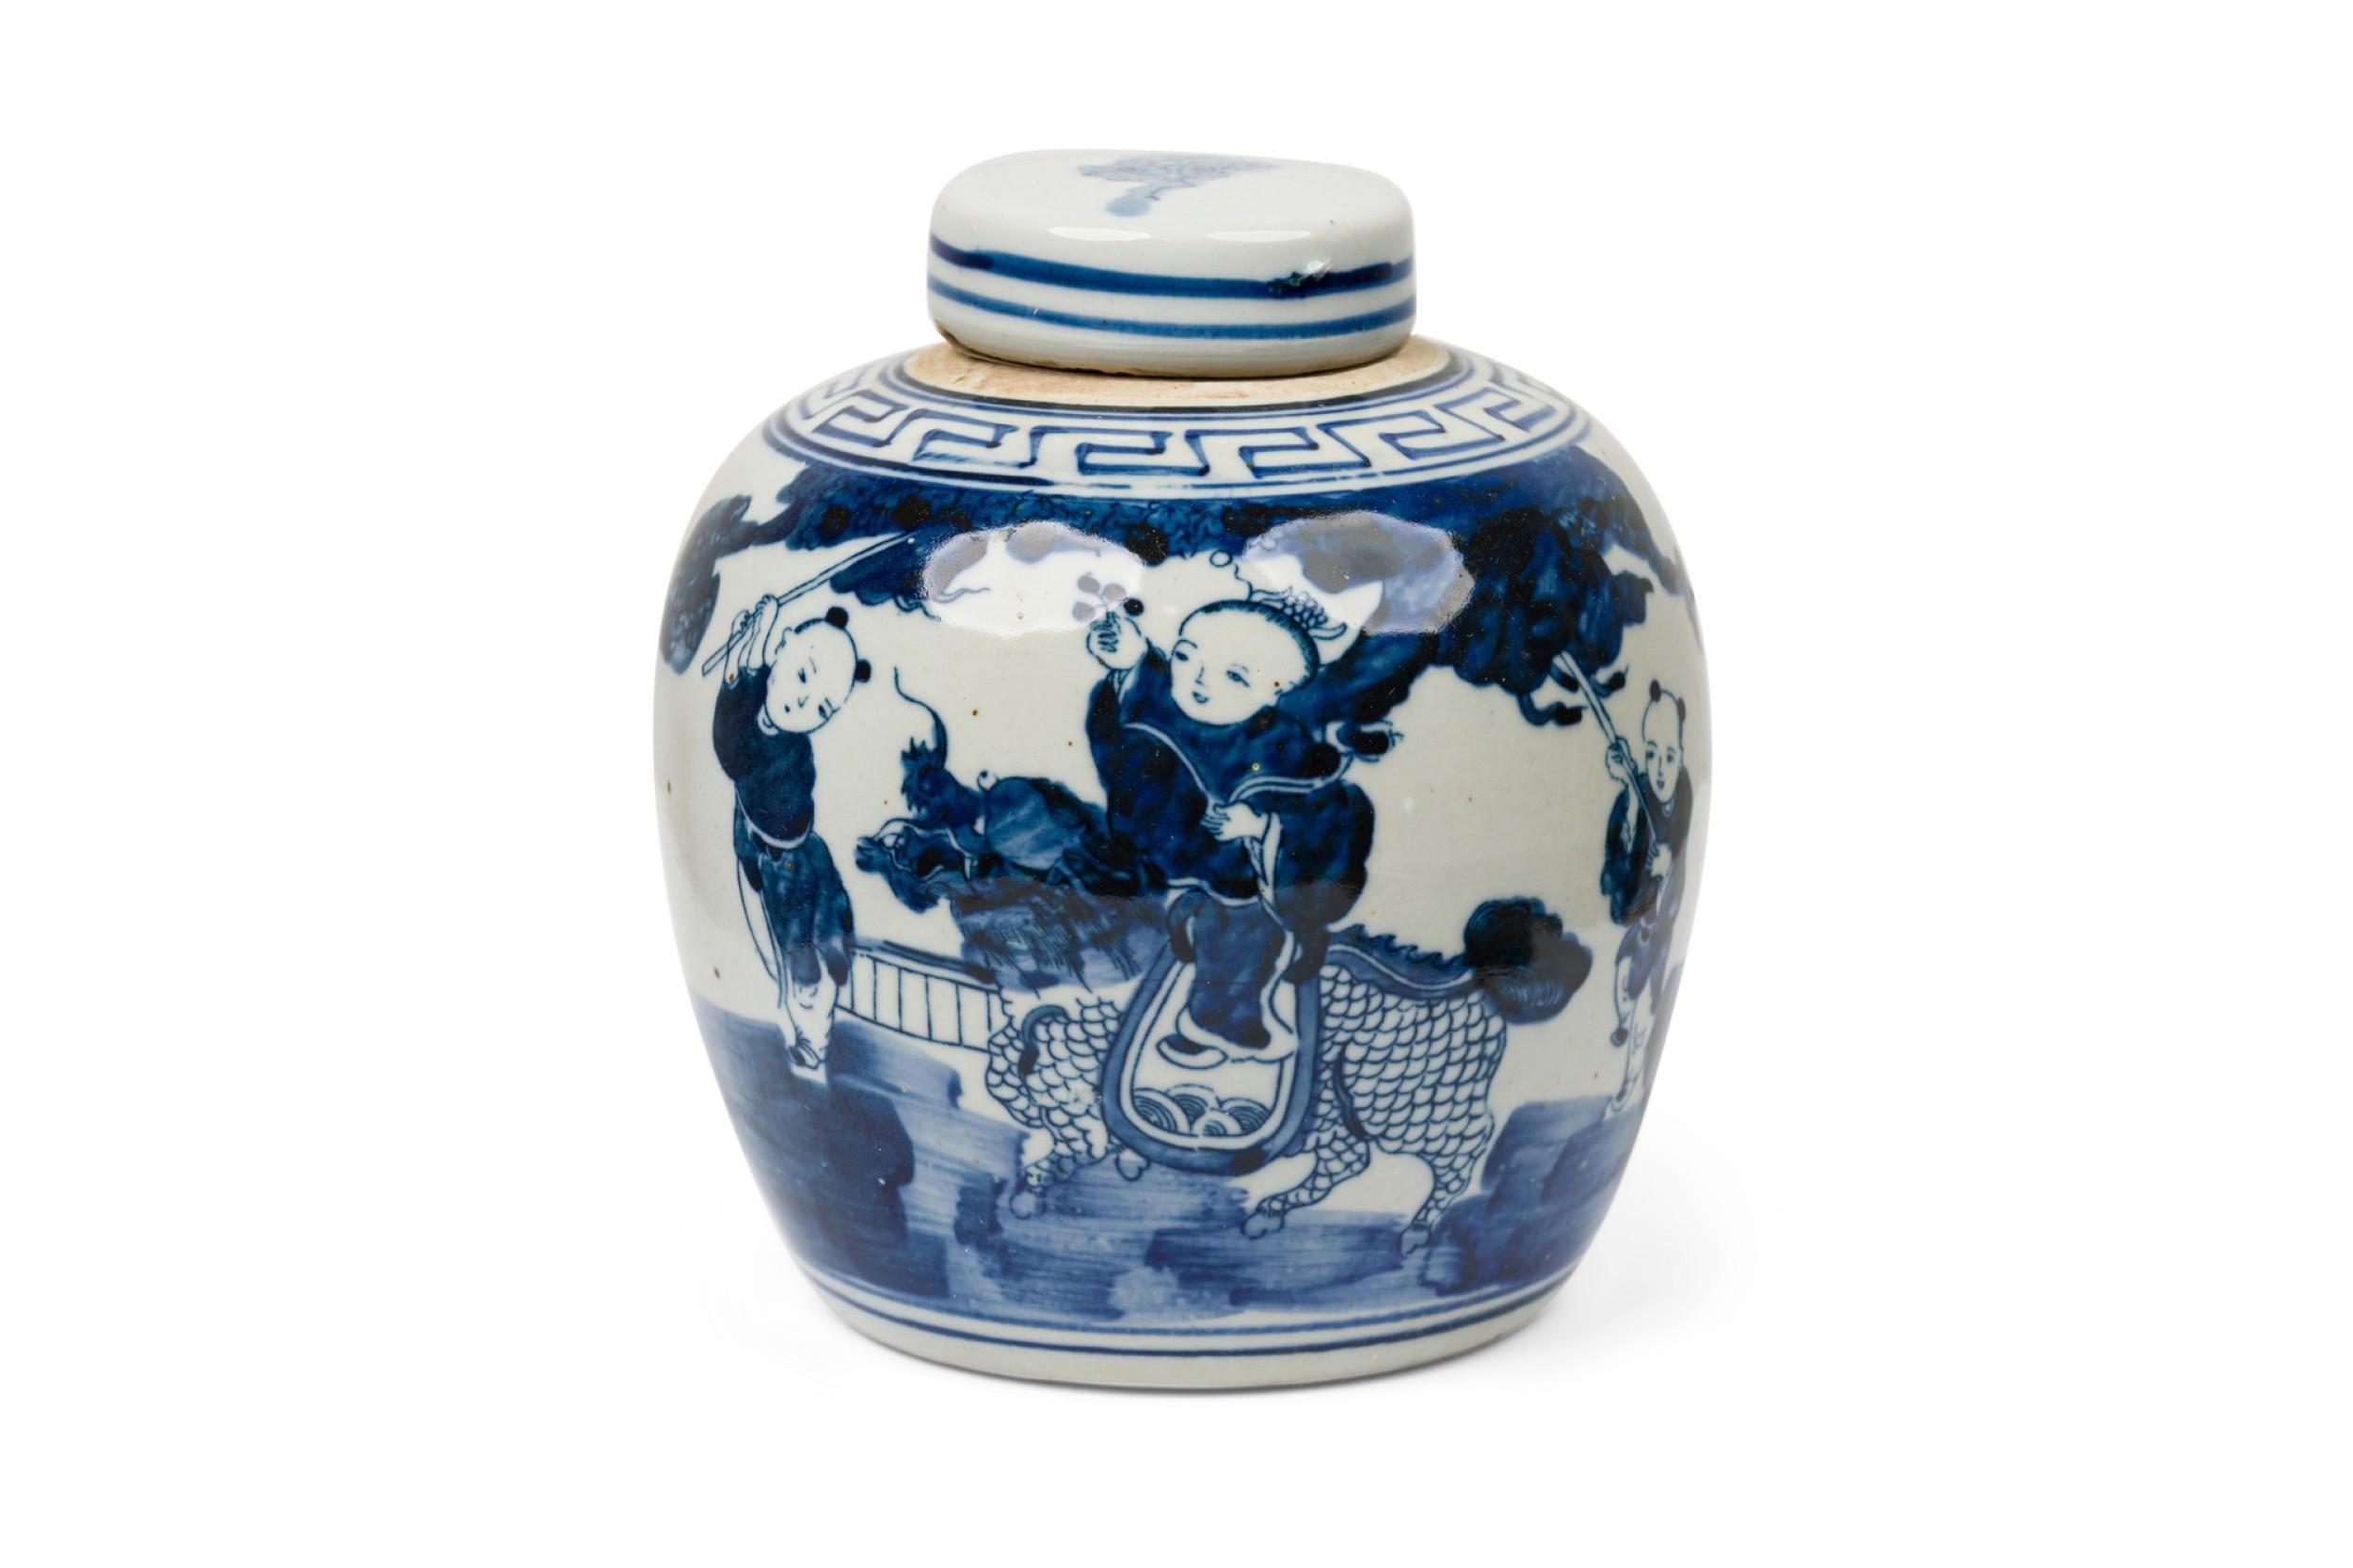 PAIR of Chinese blue & white porcelain ovoid jars, painted with a mirrored figural scene consisting of a family and elder. Decorative lids cover the unglazed necks with a keyfret border surrounding the mouth and double border at the bottom. (PRICED